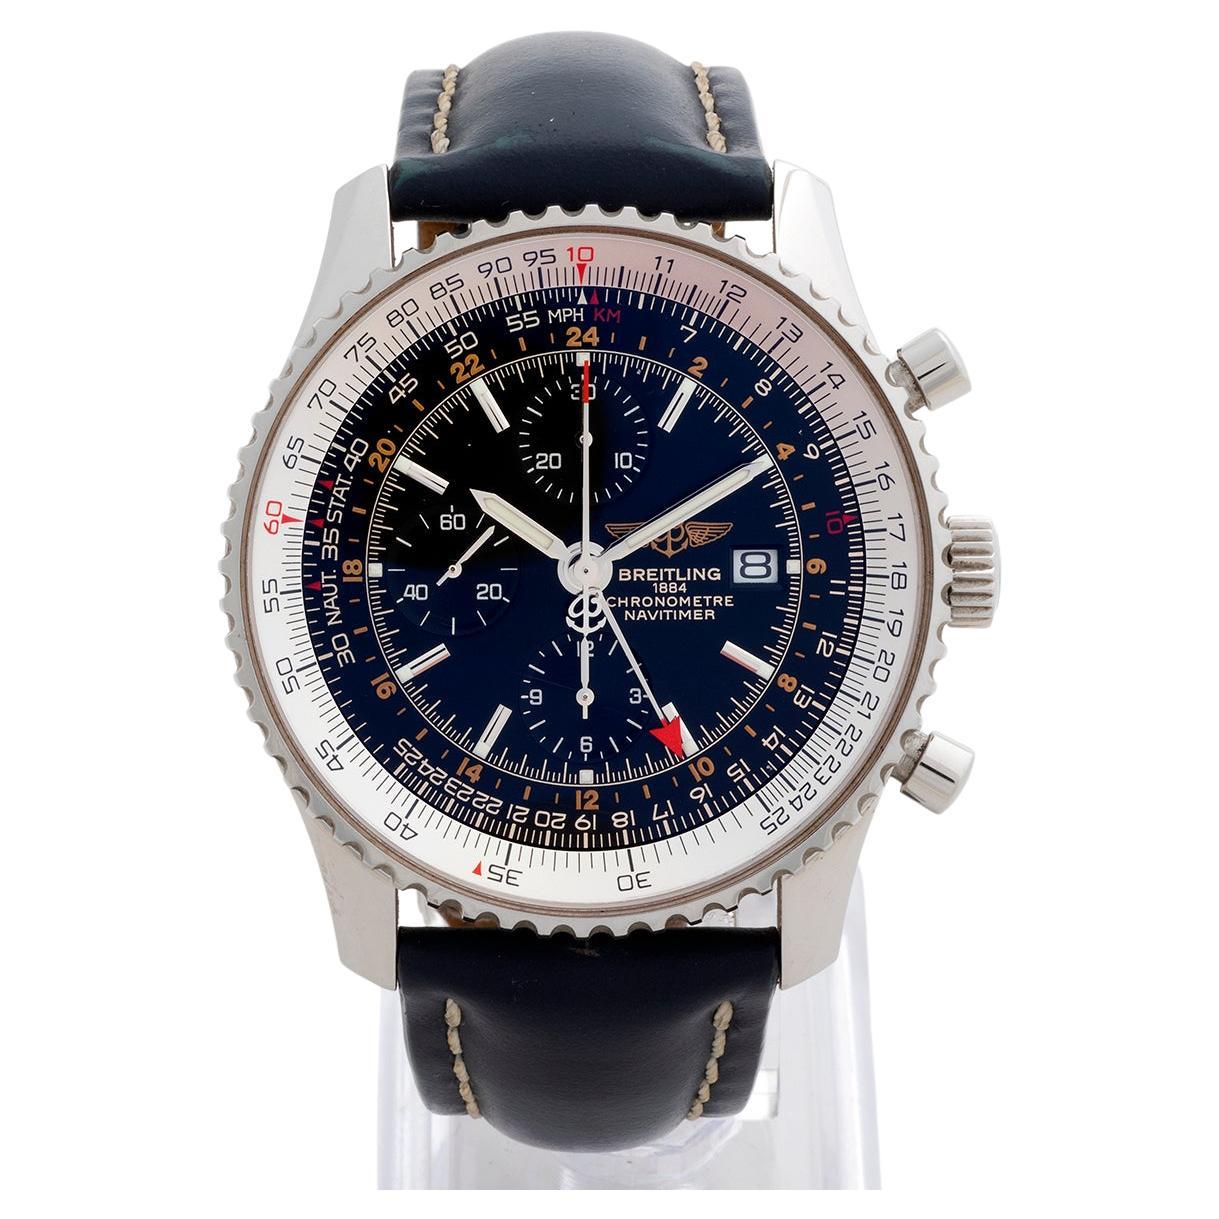 Our Breitling Navitimer GMT / World reference A24422 (A24322B726) is the best combination and features a 46mm stainless steel case with black dial, blue leather strap and folding clasp. Presented in excellent condition with light signs of use, this